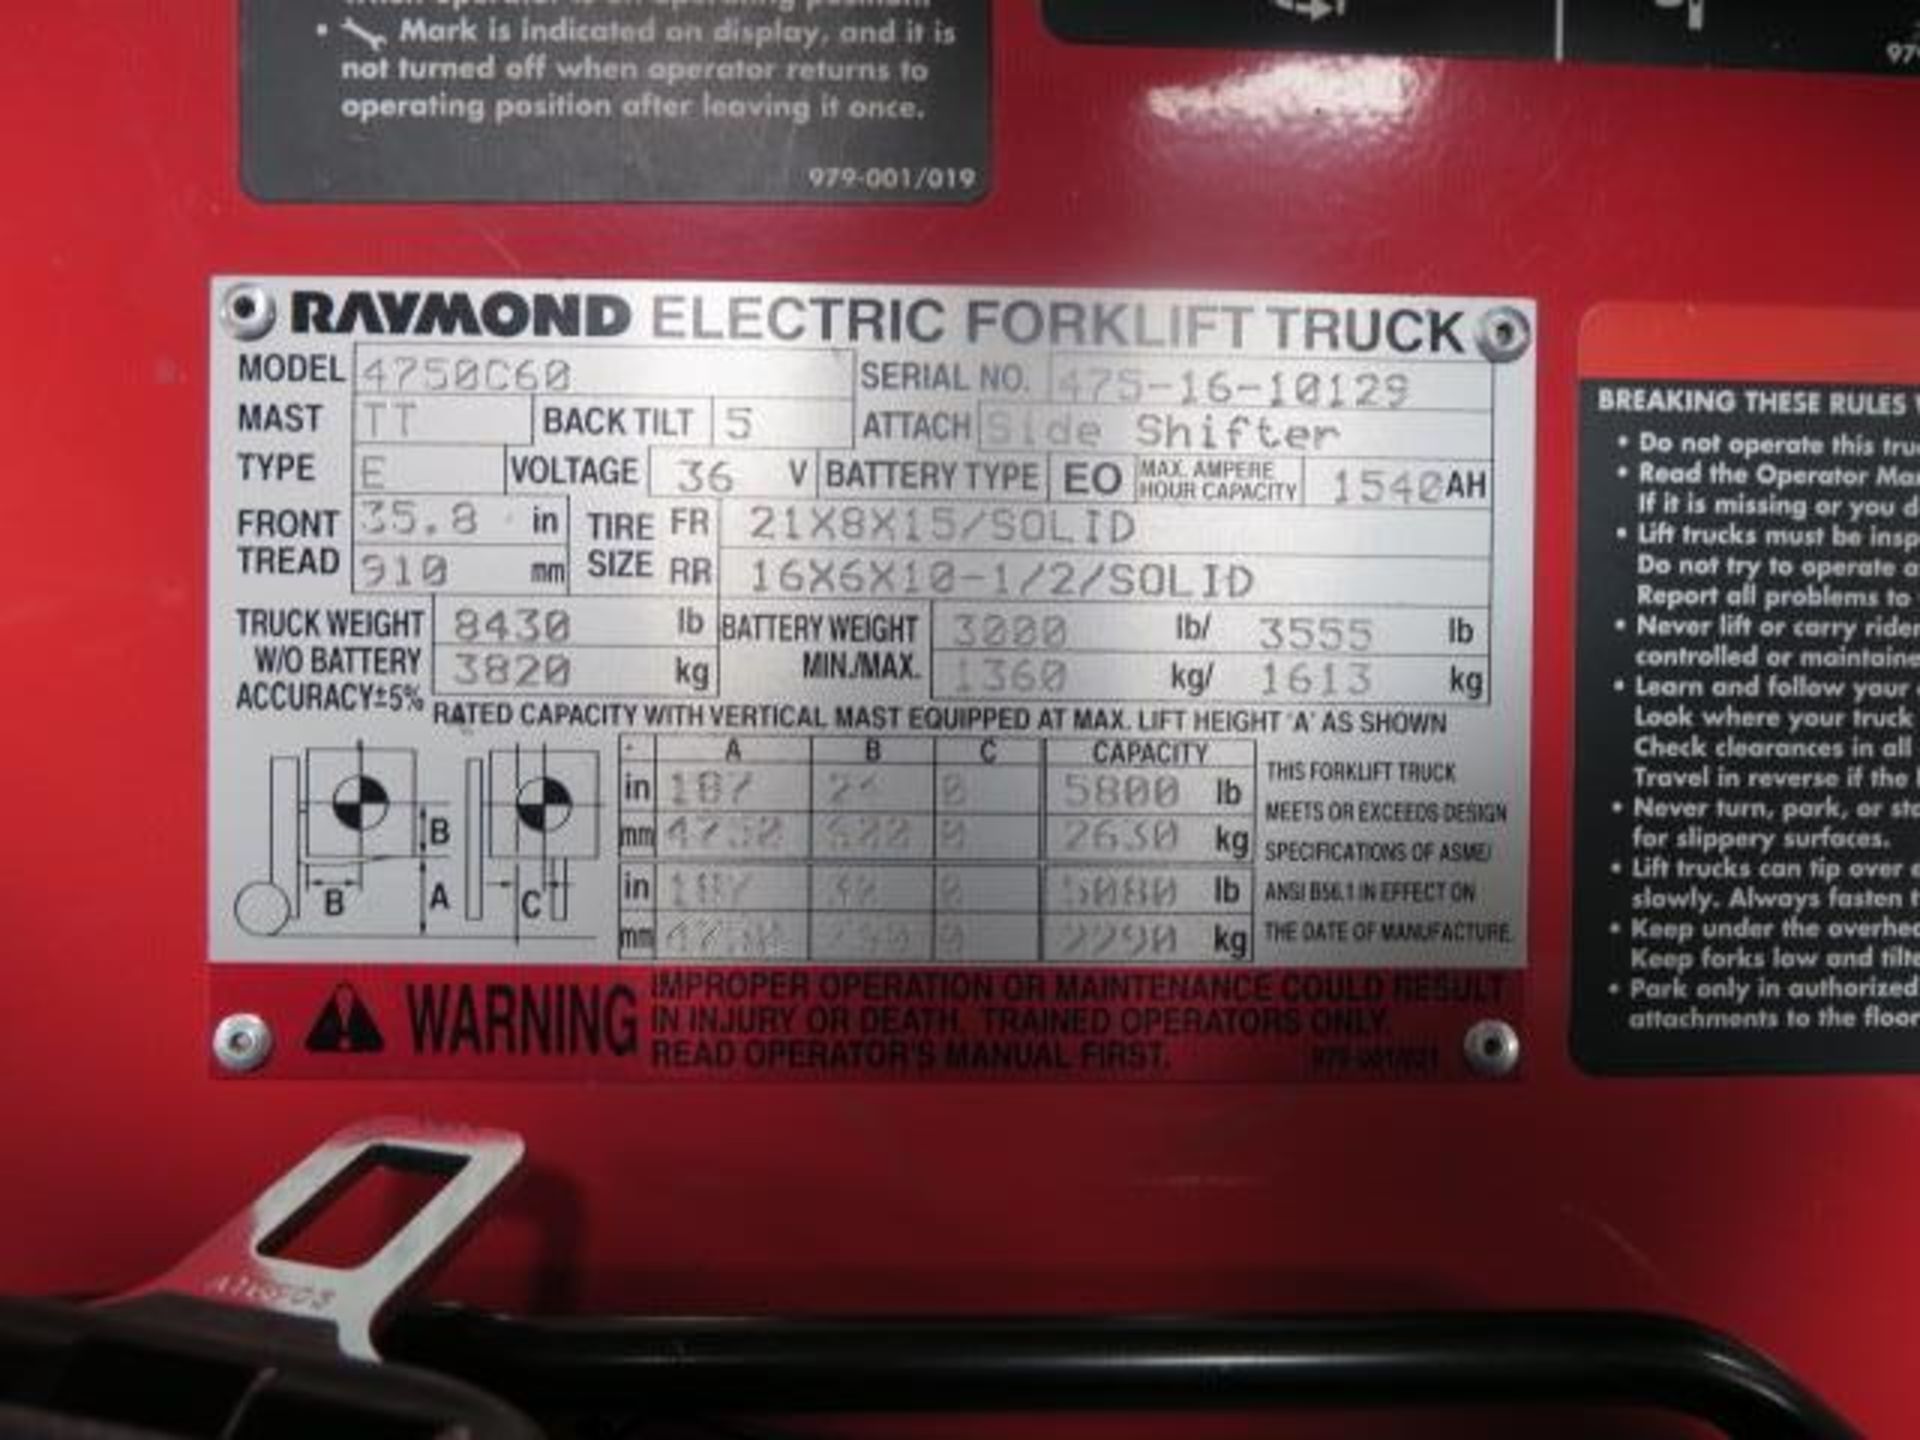 Raymond 4750C60 4750 Lb Cap Electric Forklift s/n 475-6-10129 w/ 3-Stage Mast, 187” Lift, SOLD AS IS - Image 17 of 17